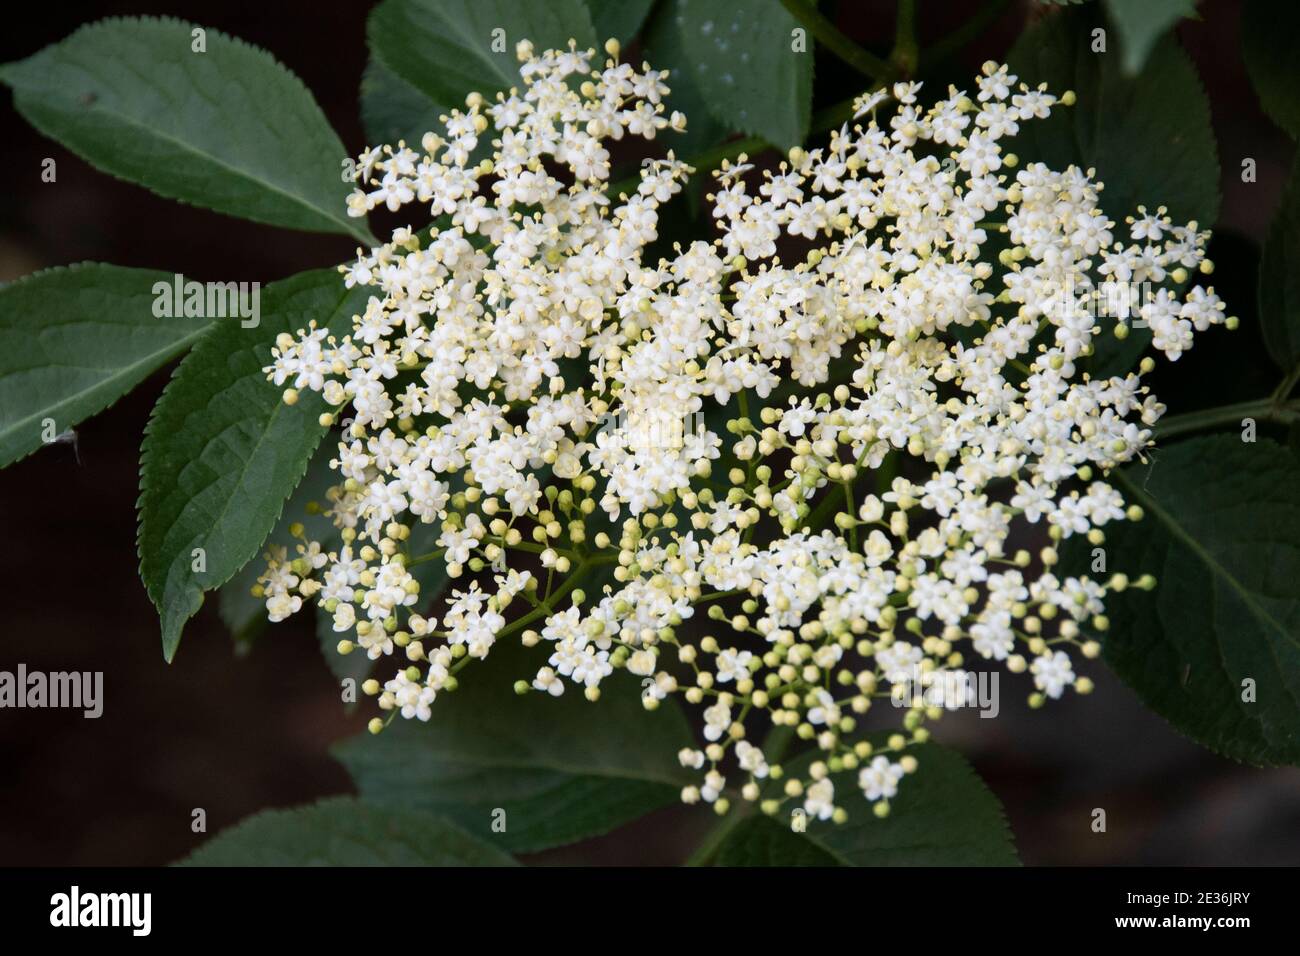 Close up on the white petals of an Elder tree in bloom Stock Photo